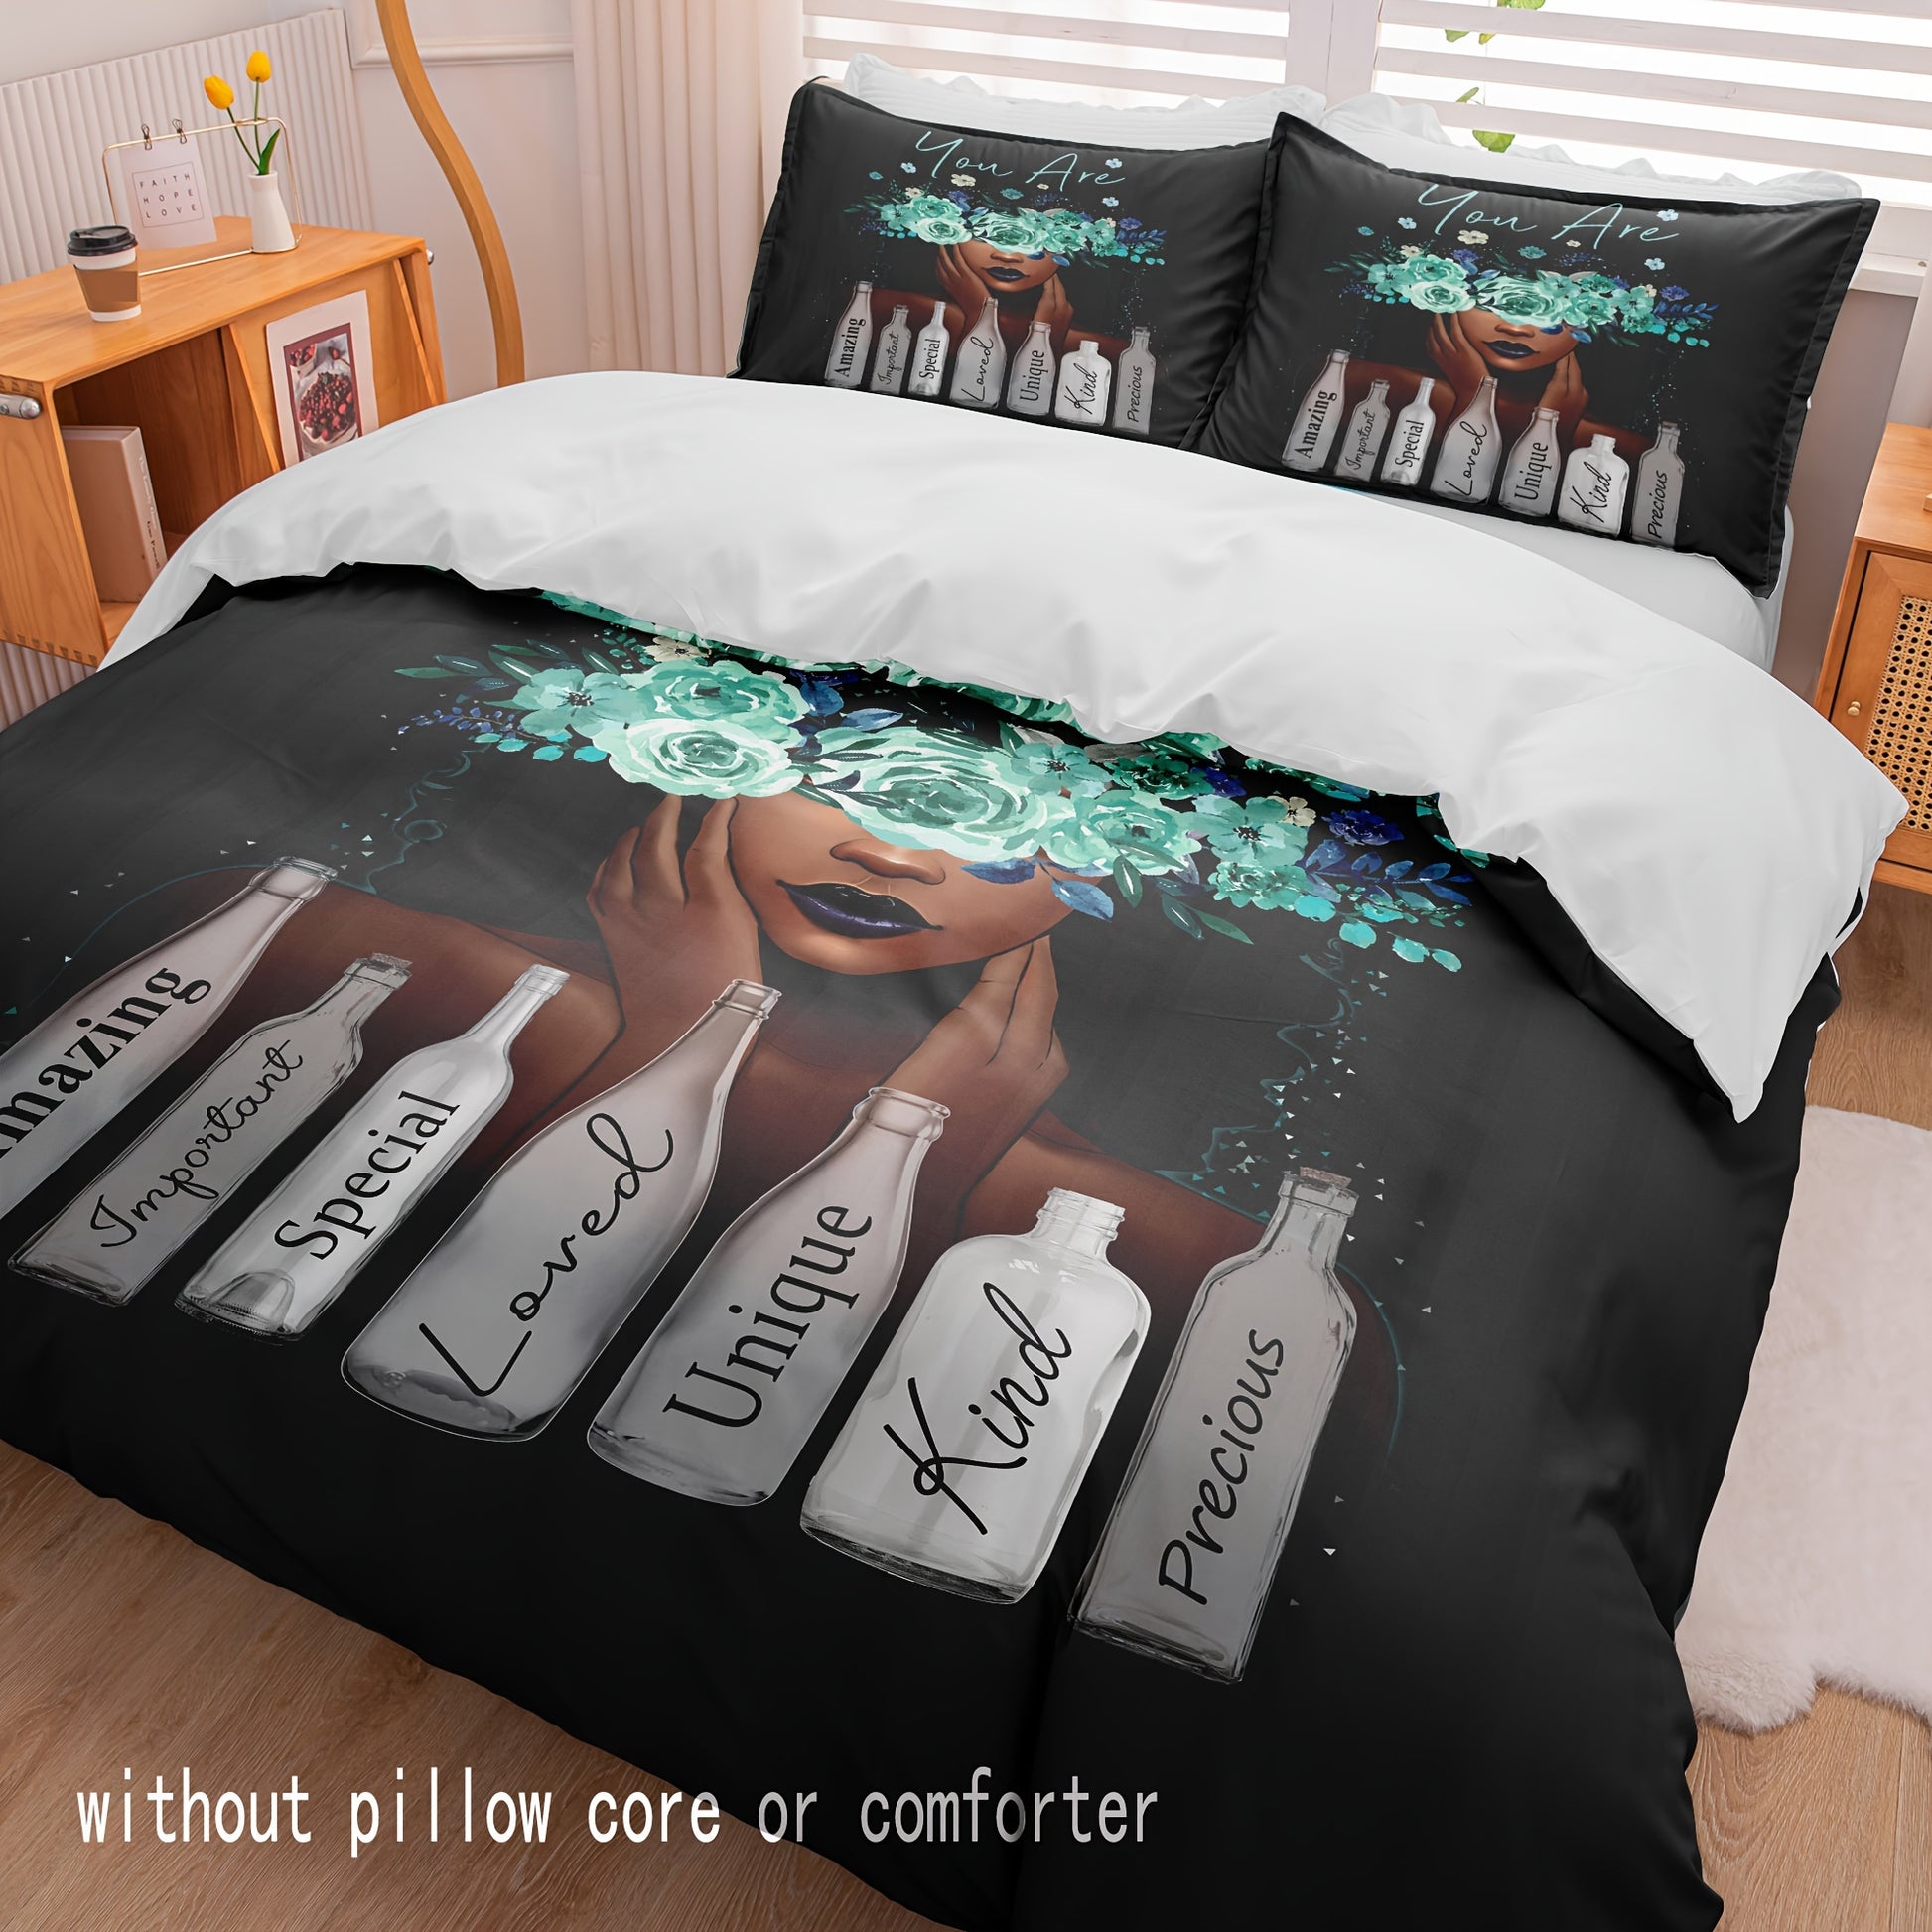 3pcs You Are (positive affirmations) Christian Duvet Cover Set (Core Not Included), Includes 1 Duvet Cover And 2 Pillowcases claimedbygoddesigns